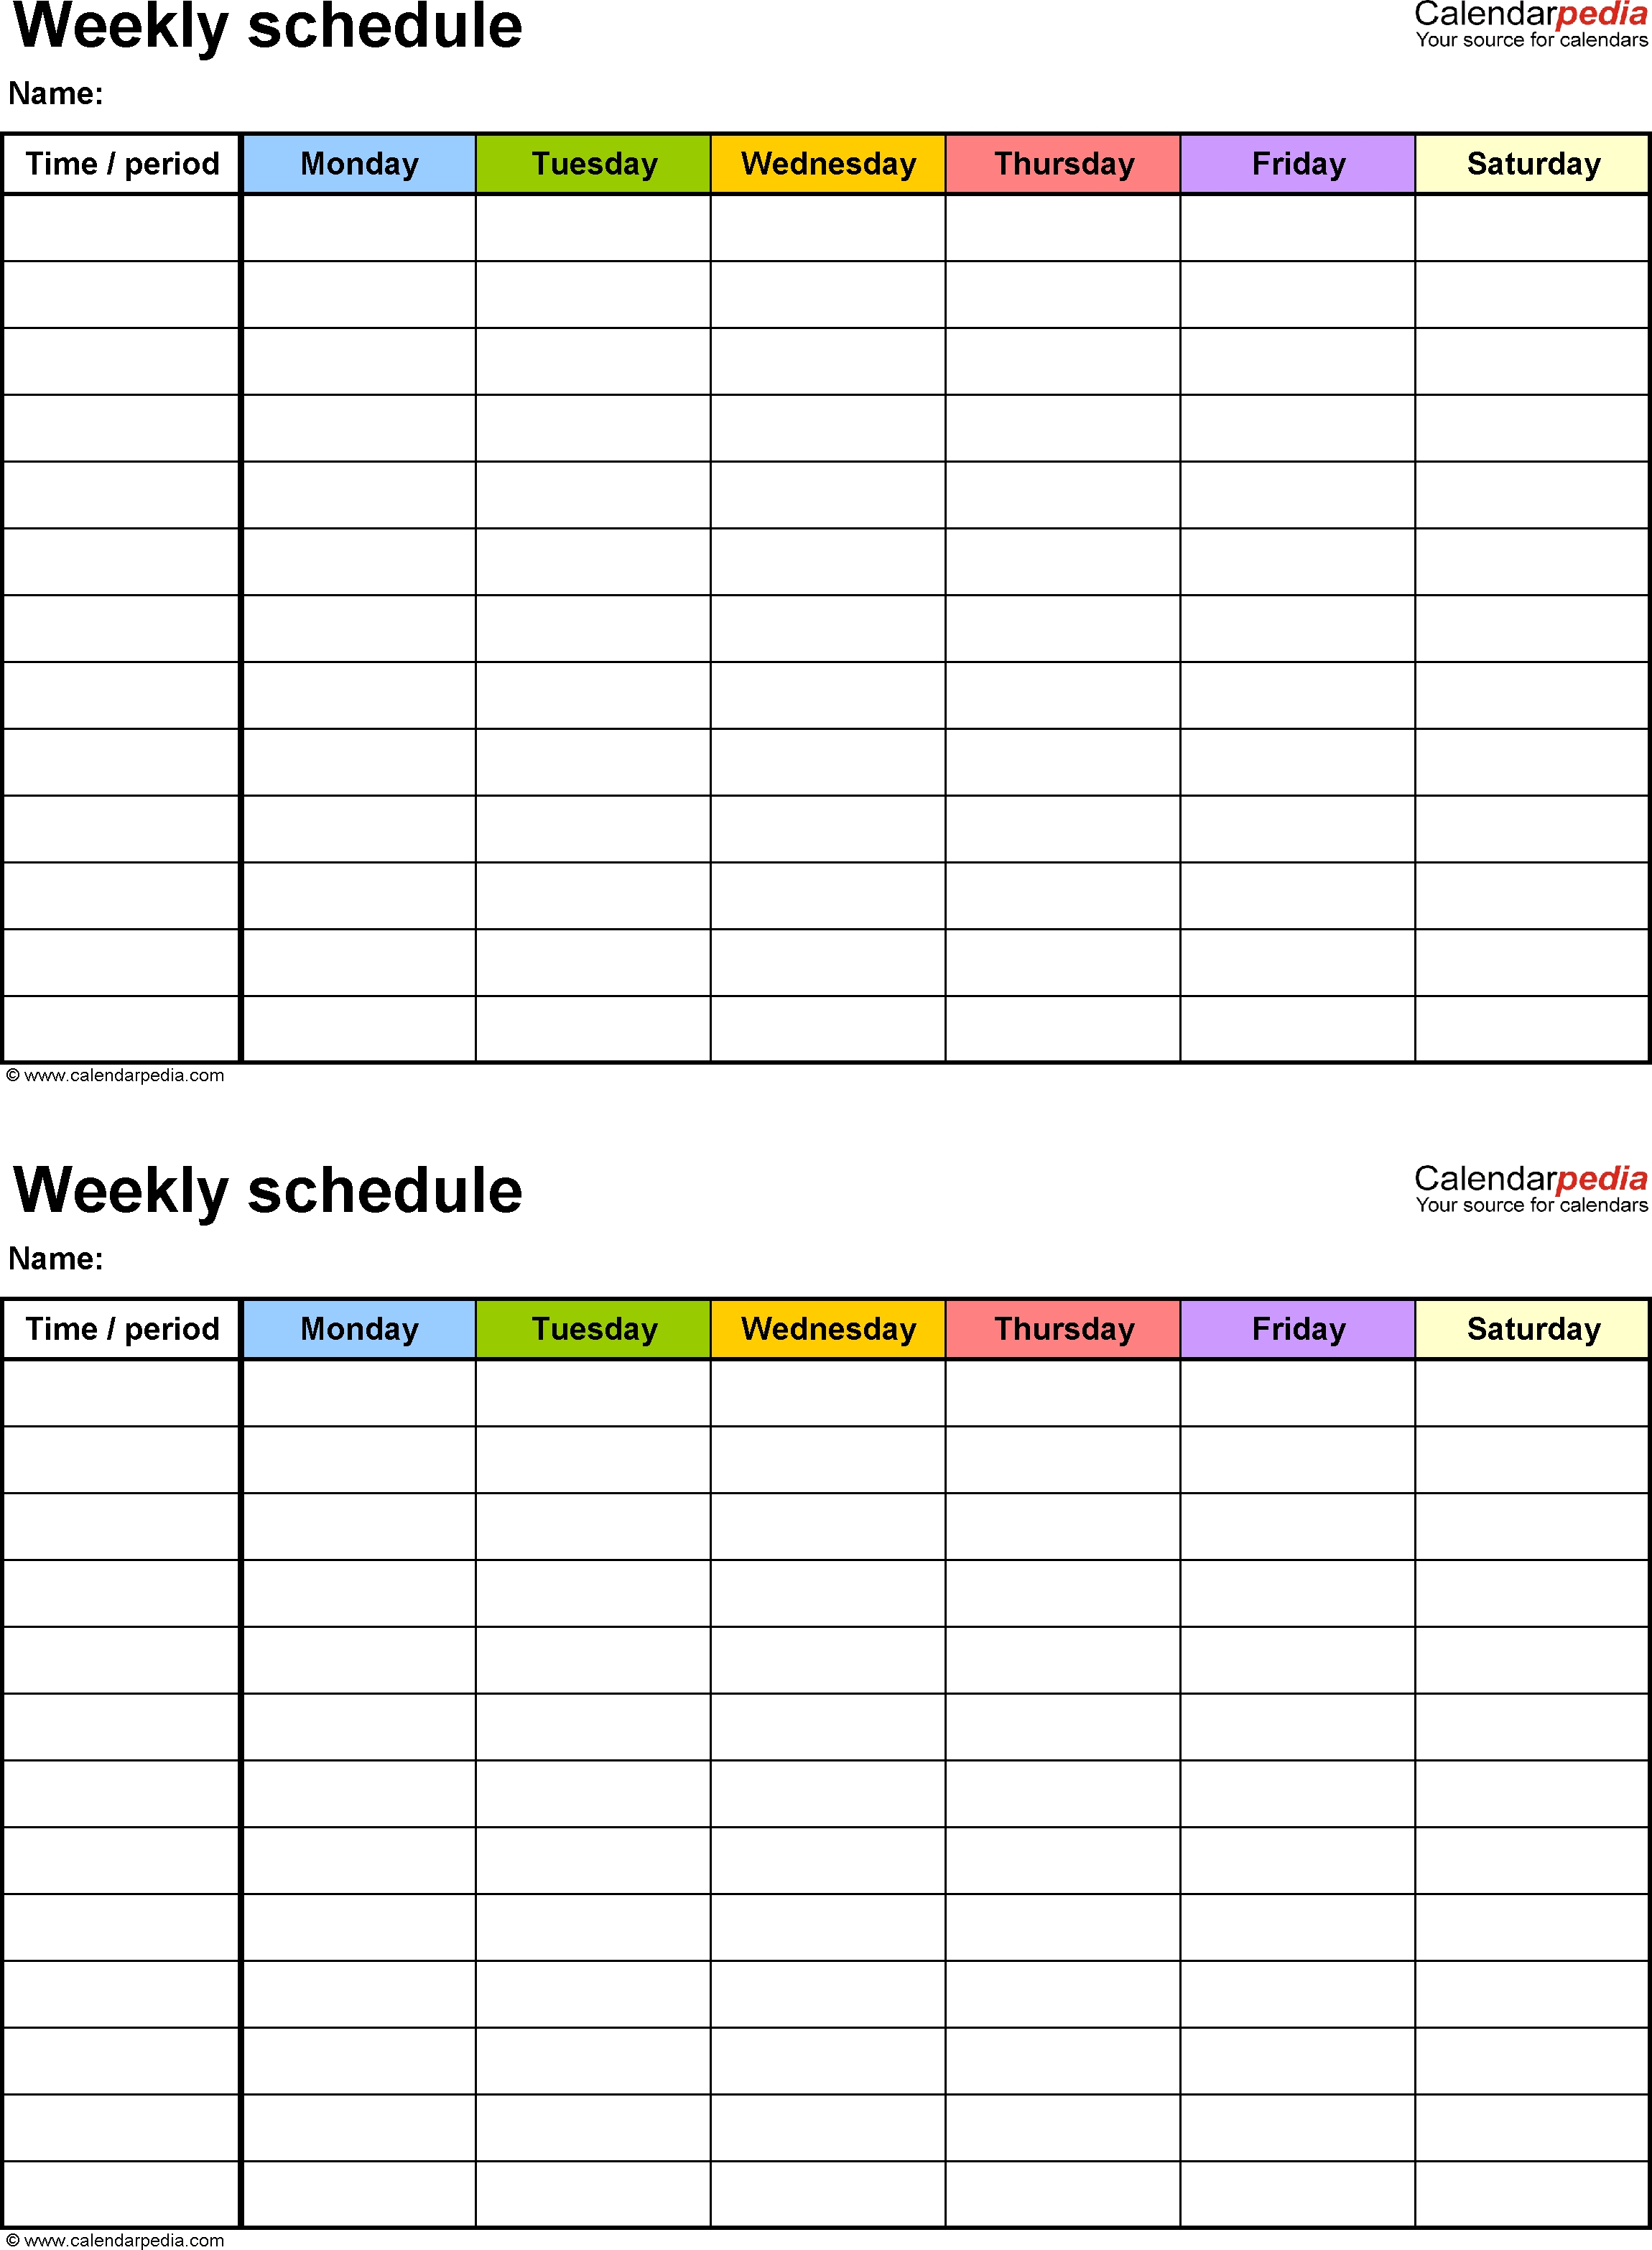 Free Weekly Schedule Templates For Word - 18 Templates-One Week Monday Through Friday Calendar Template